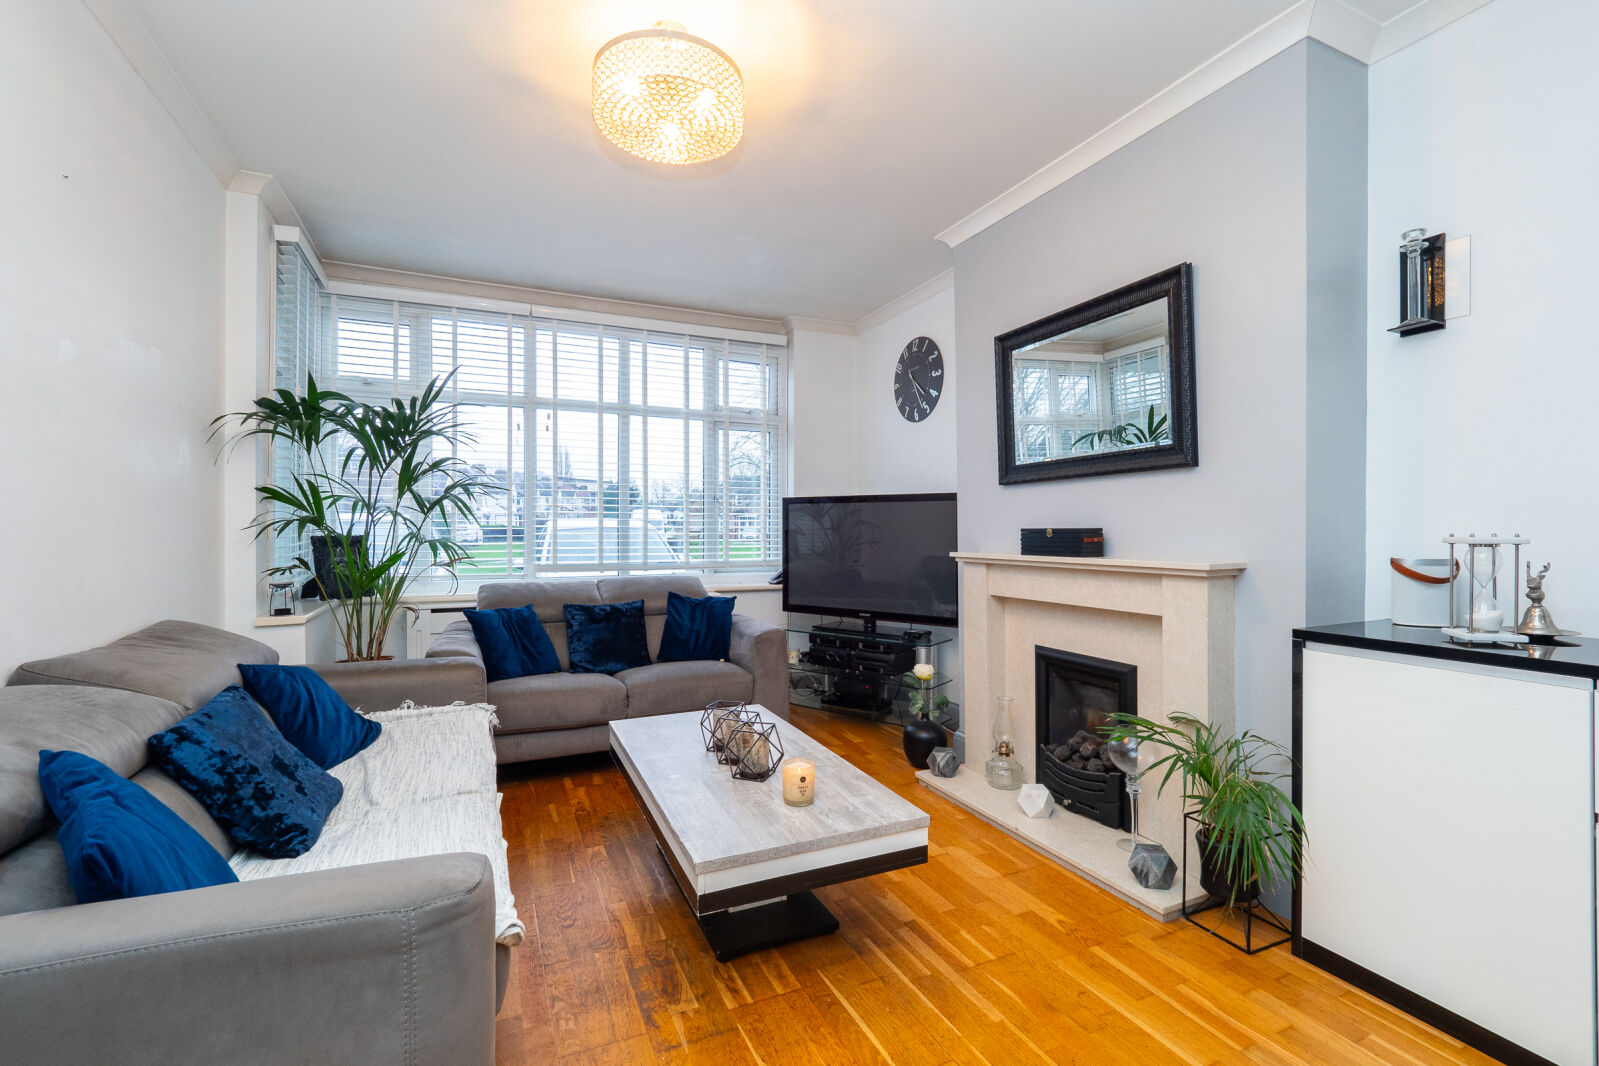 3 bedroom mid terraced house for sale Green Lanes, KT19, main image